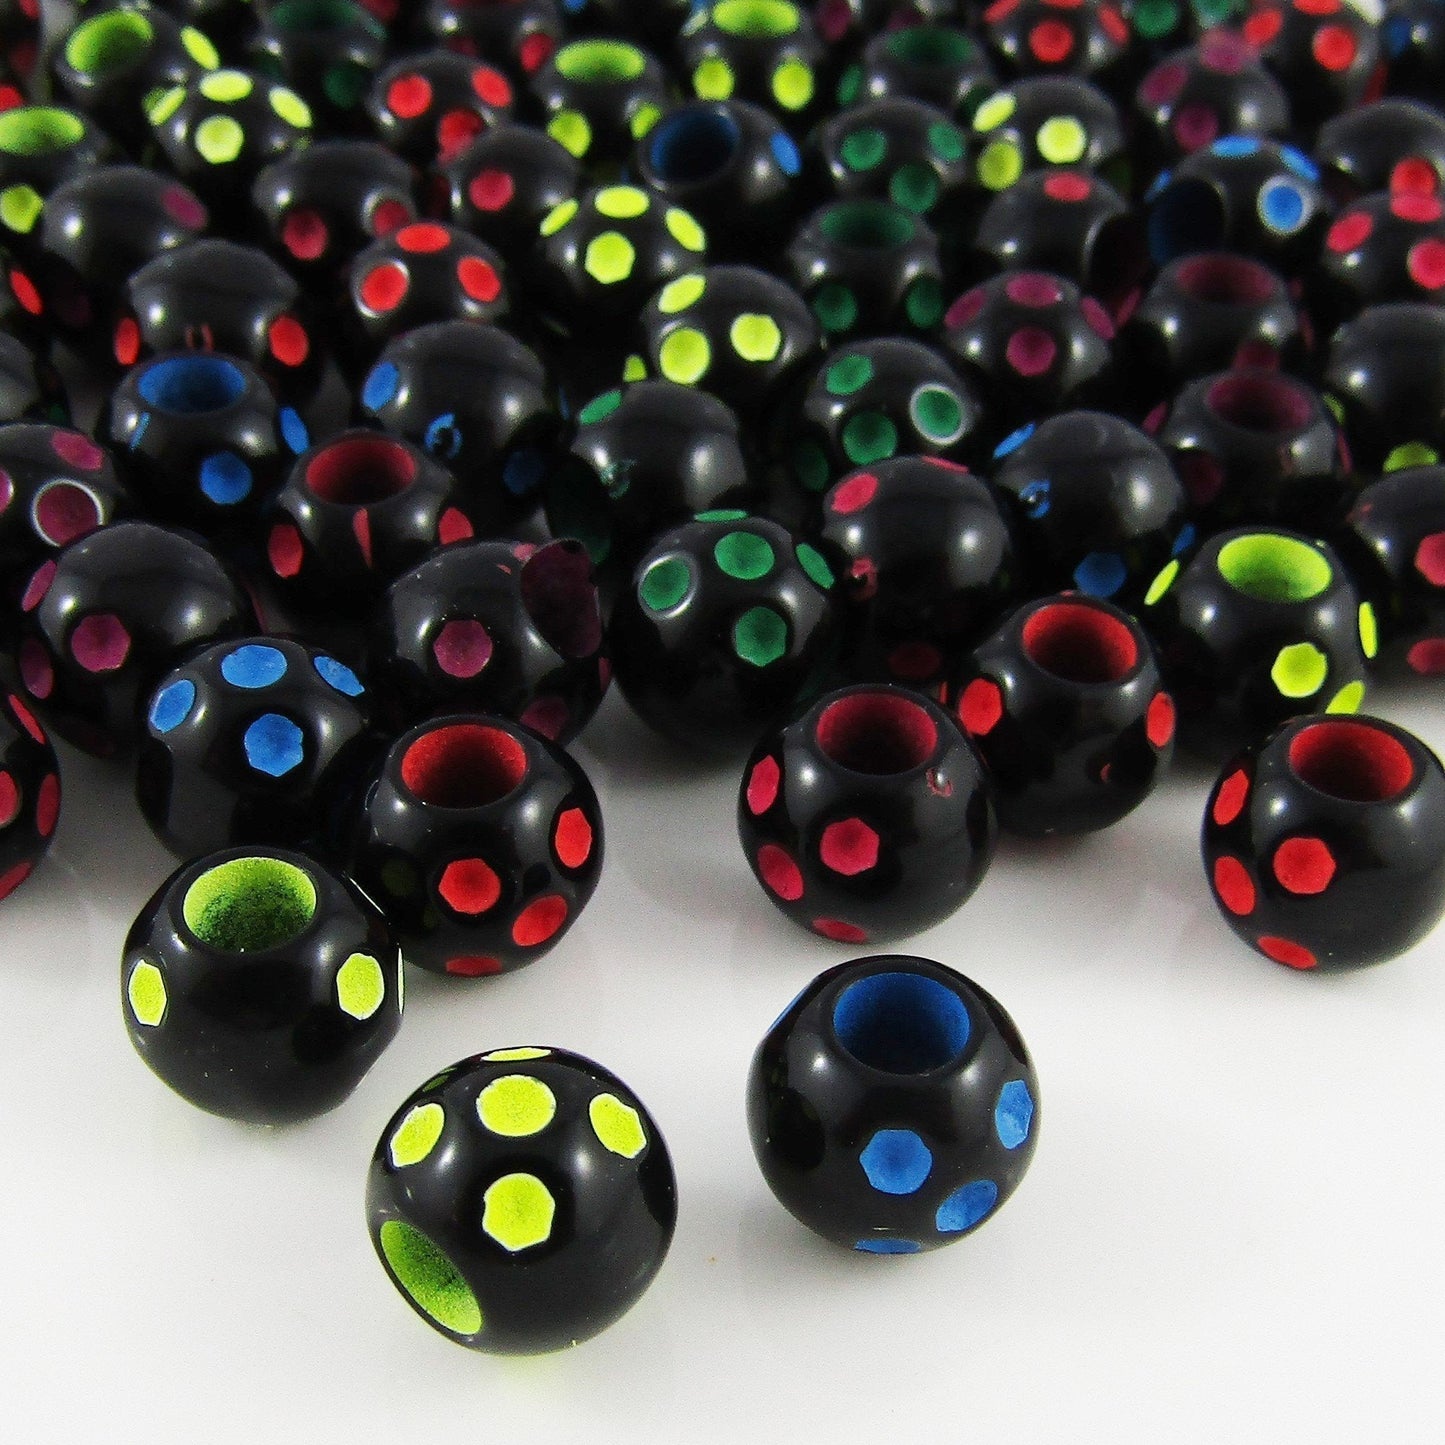 50g 160+pcs Acrylic Spotted Round Craft Beads 9x8mm Hole 3.5mm